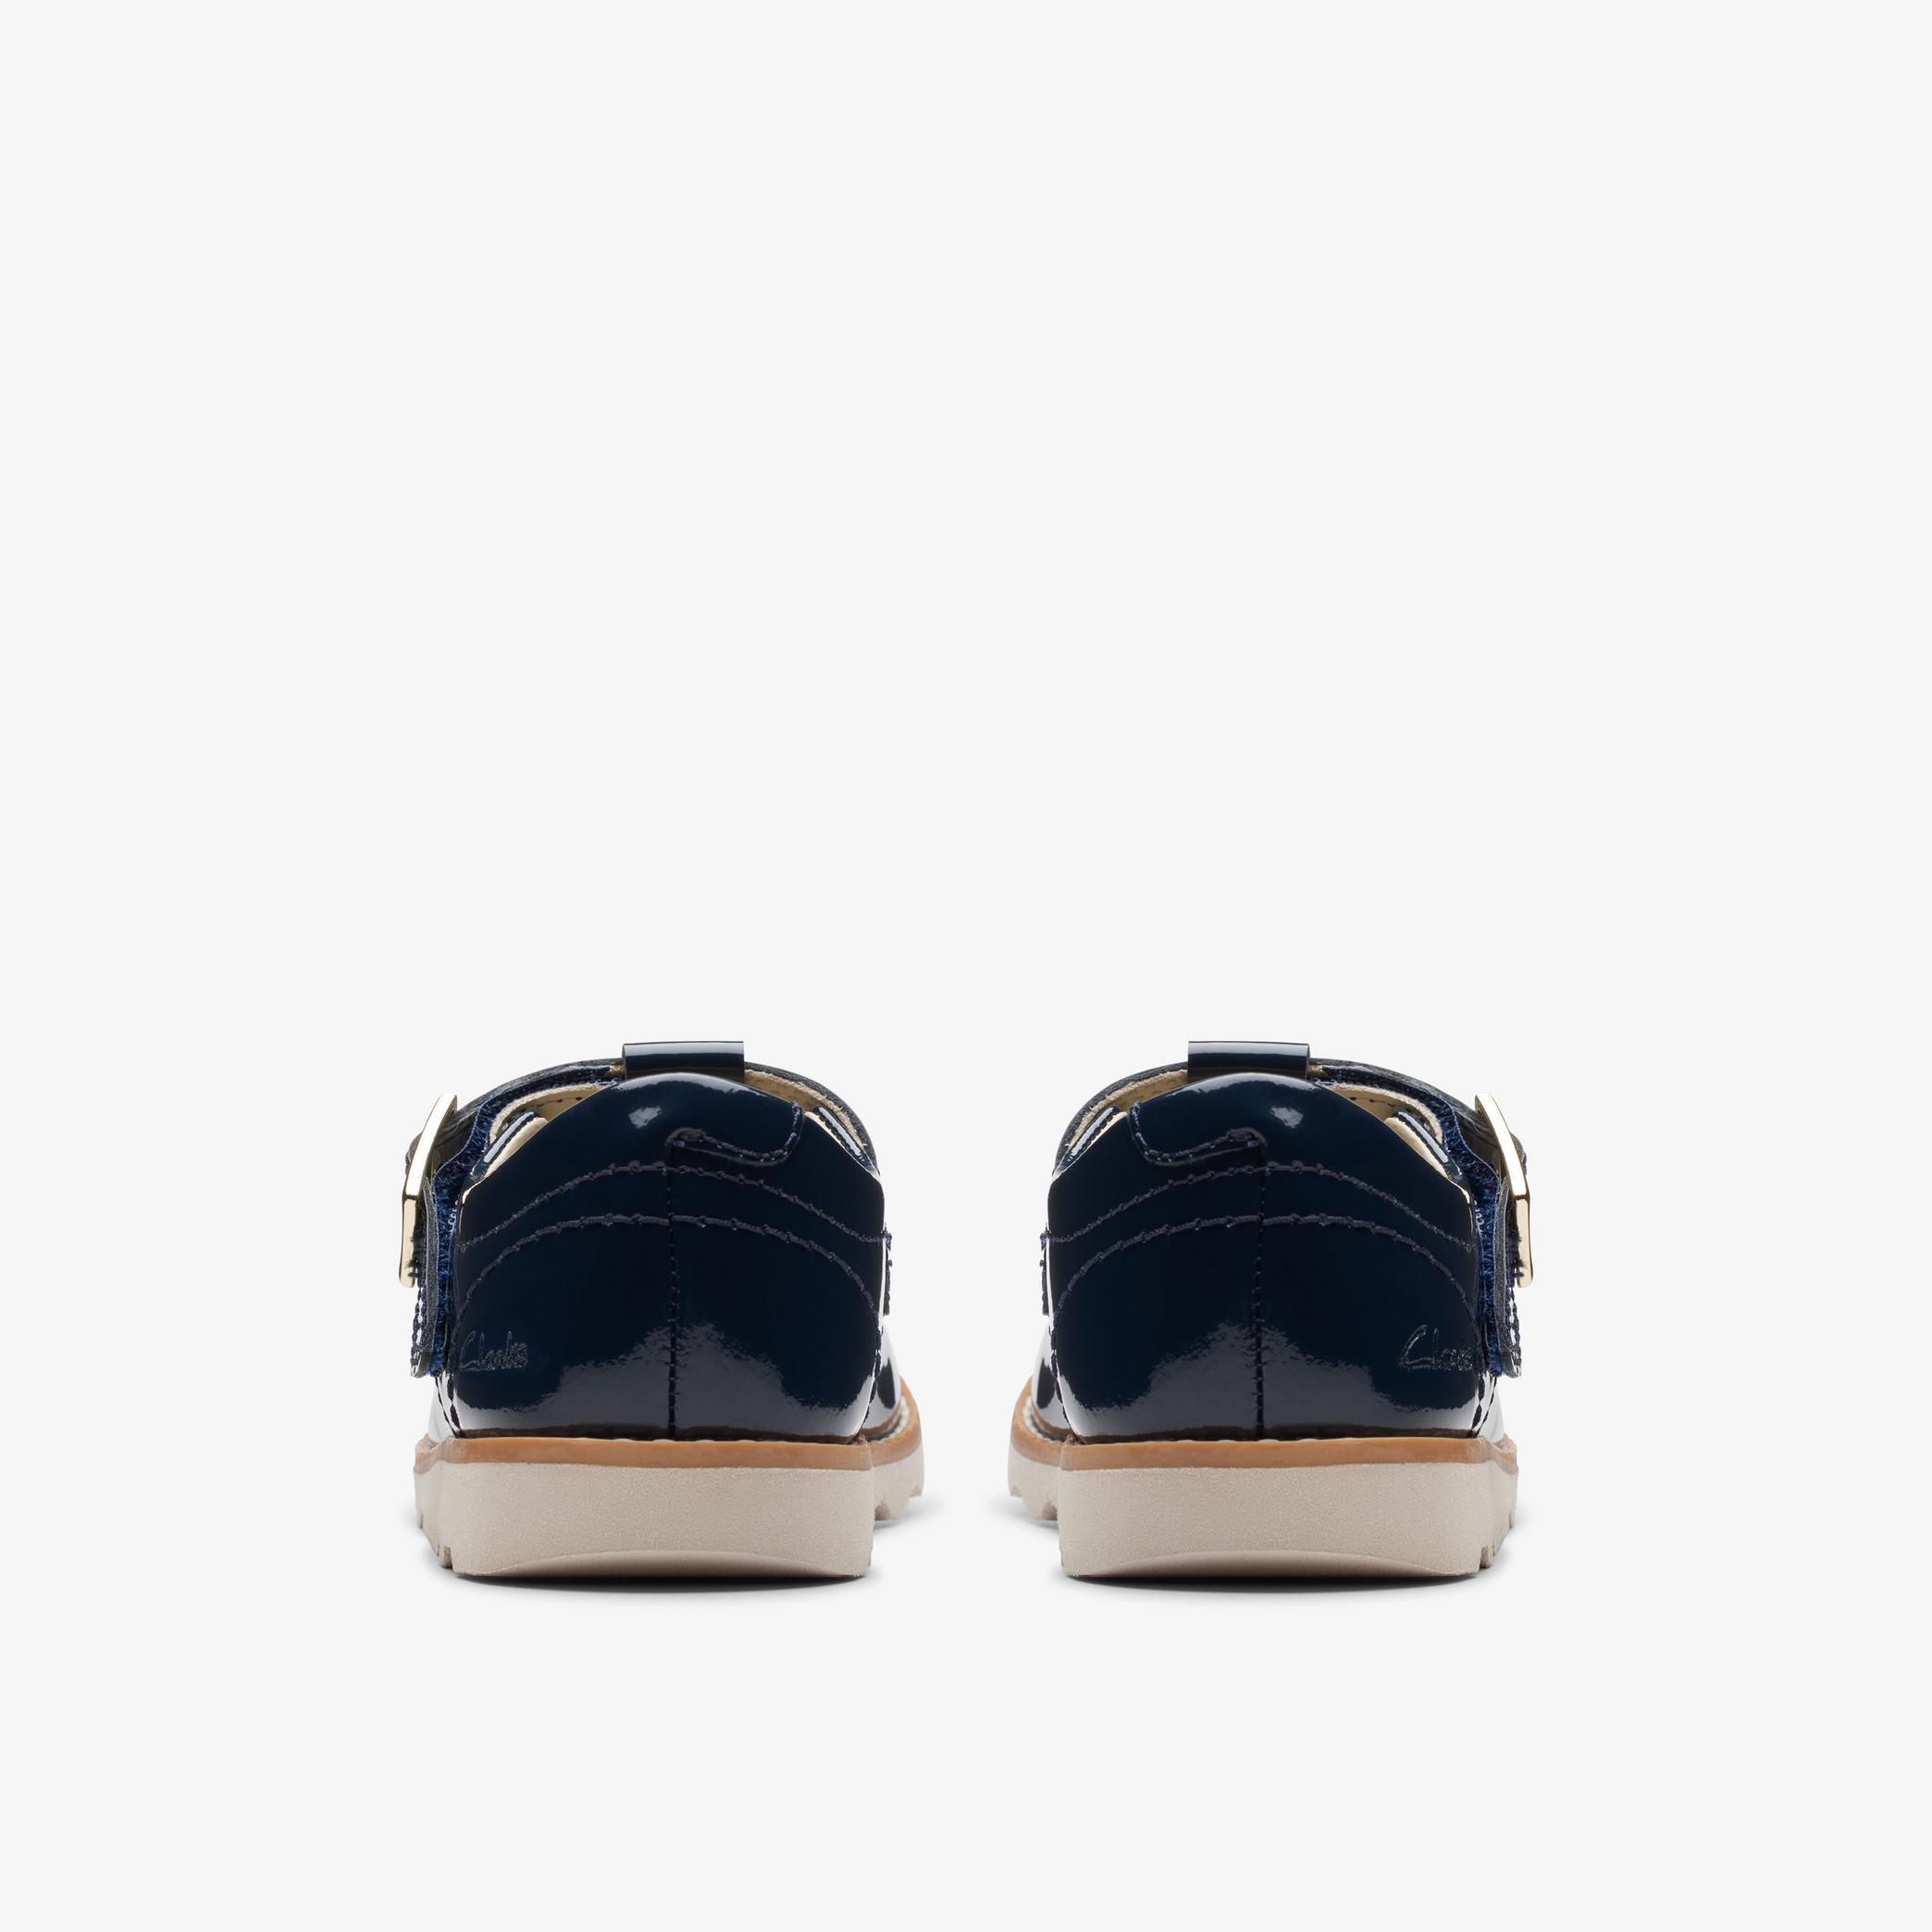 Crown Print Toddler Navy Patent T Bar Shoes, view 5 of 6